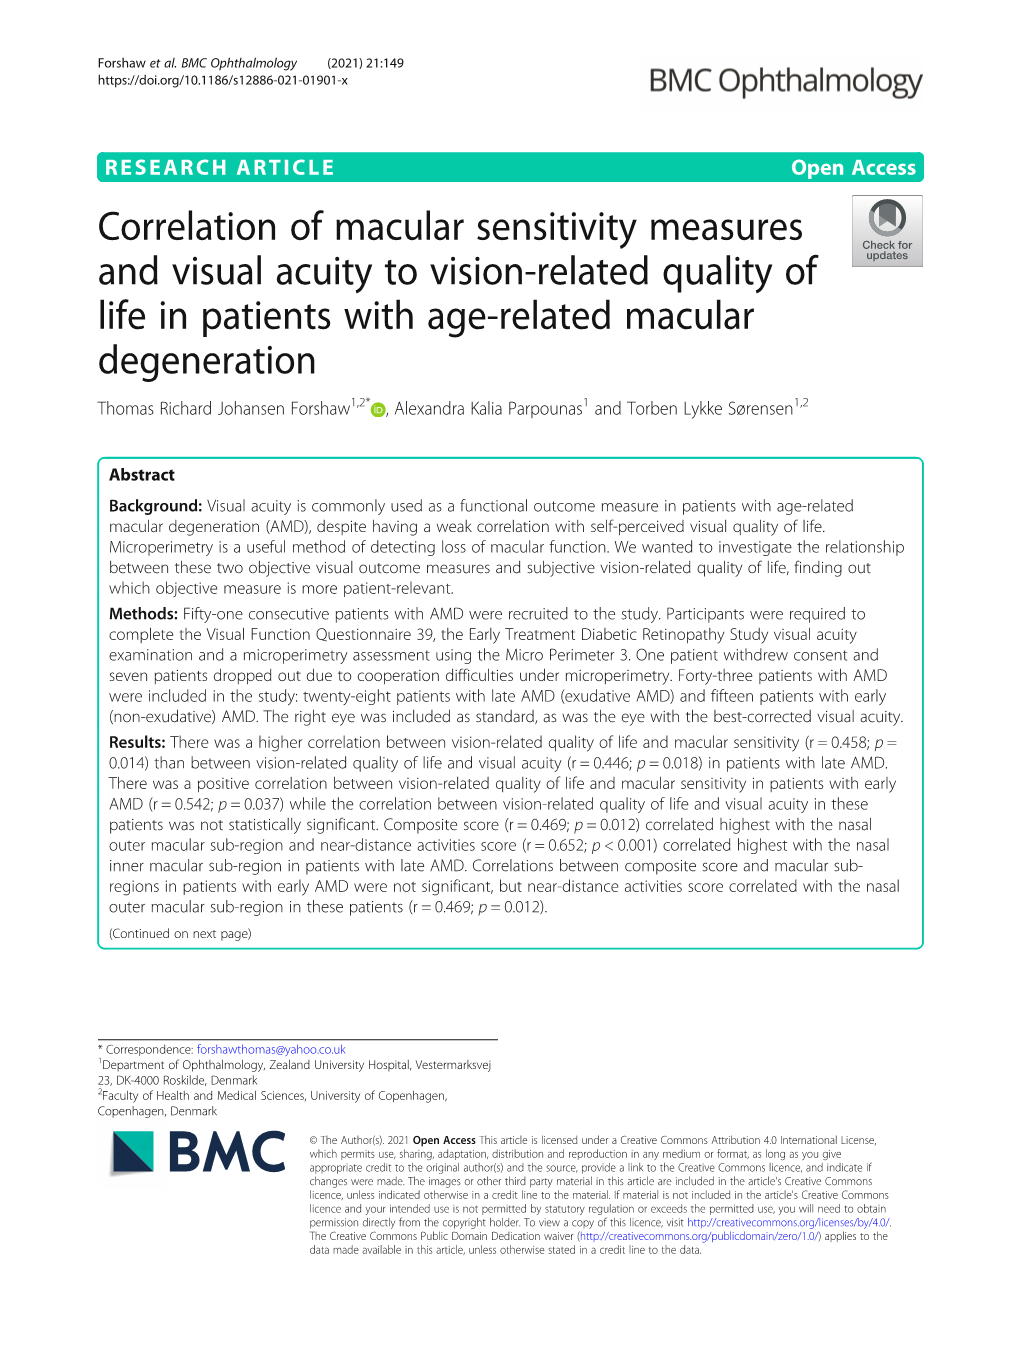 Correlation of Macular Sensitivity Measures and Visual Acuity to Vision-Related Quality of Life in Patients with Age-Related